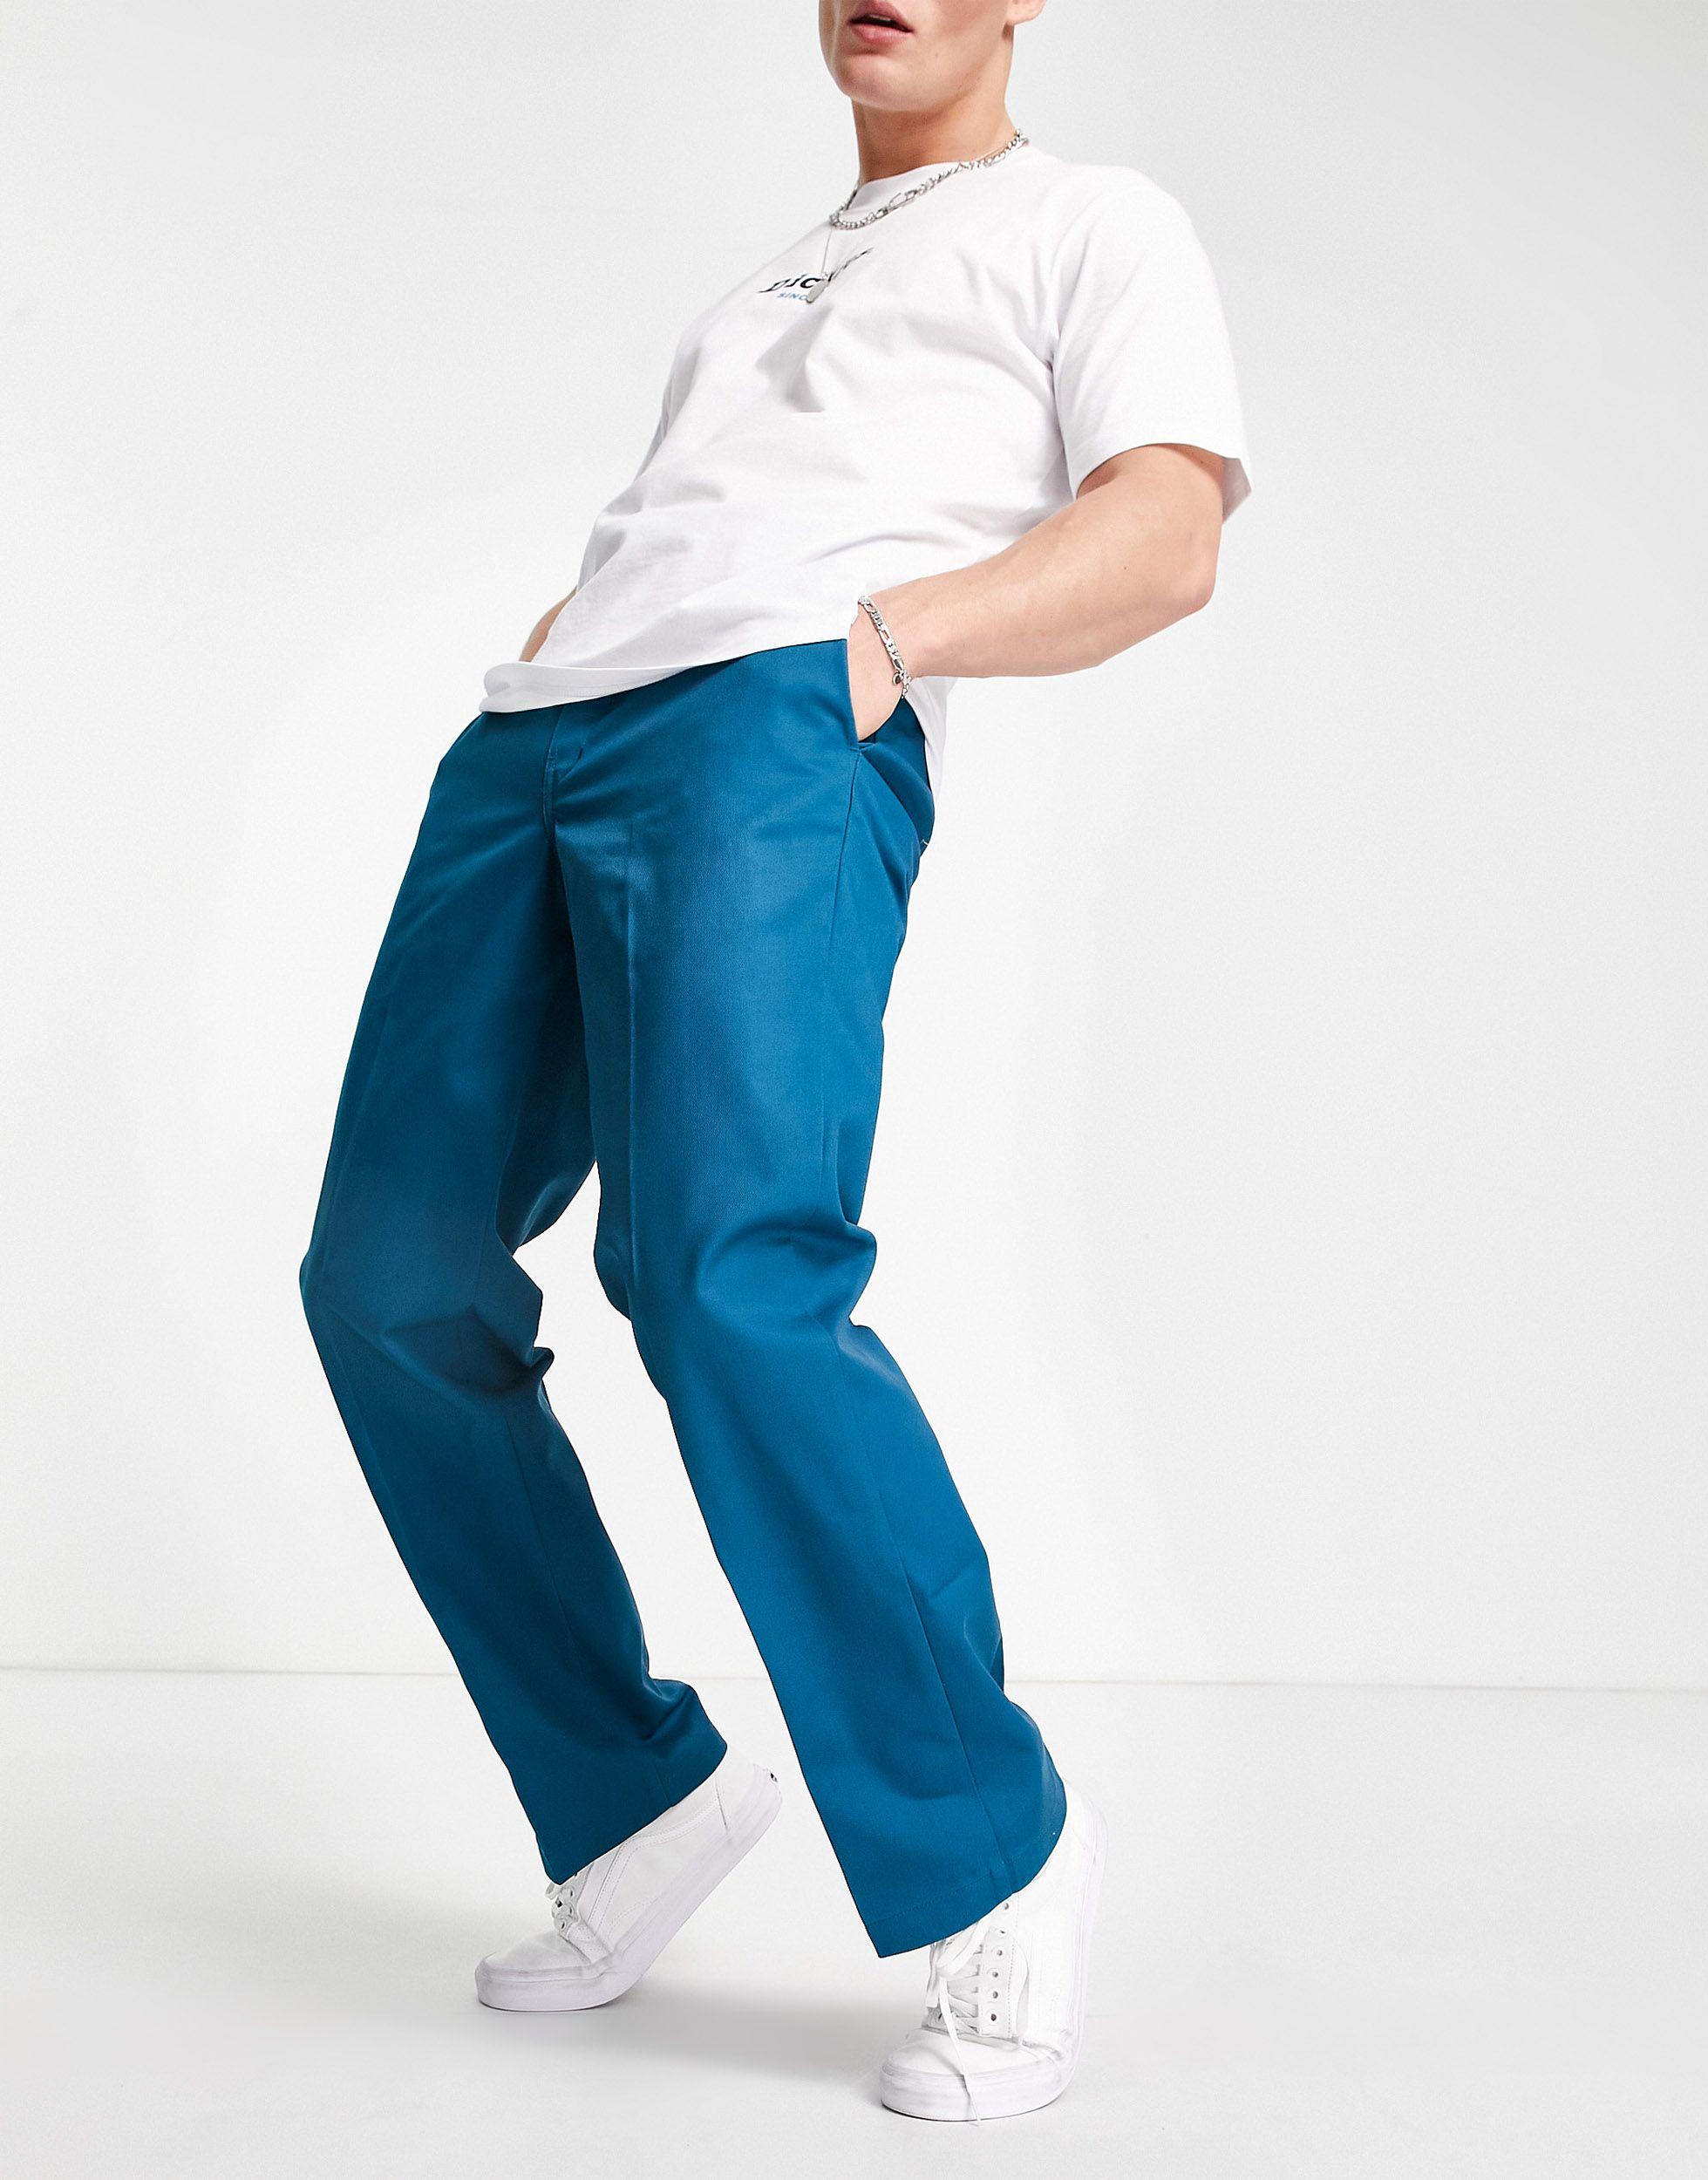 PANTS.. Details about   NEW MEN'S DICKIES 874 ORIGINAL FIT NAVY BLUE WORK TROUSERS